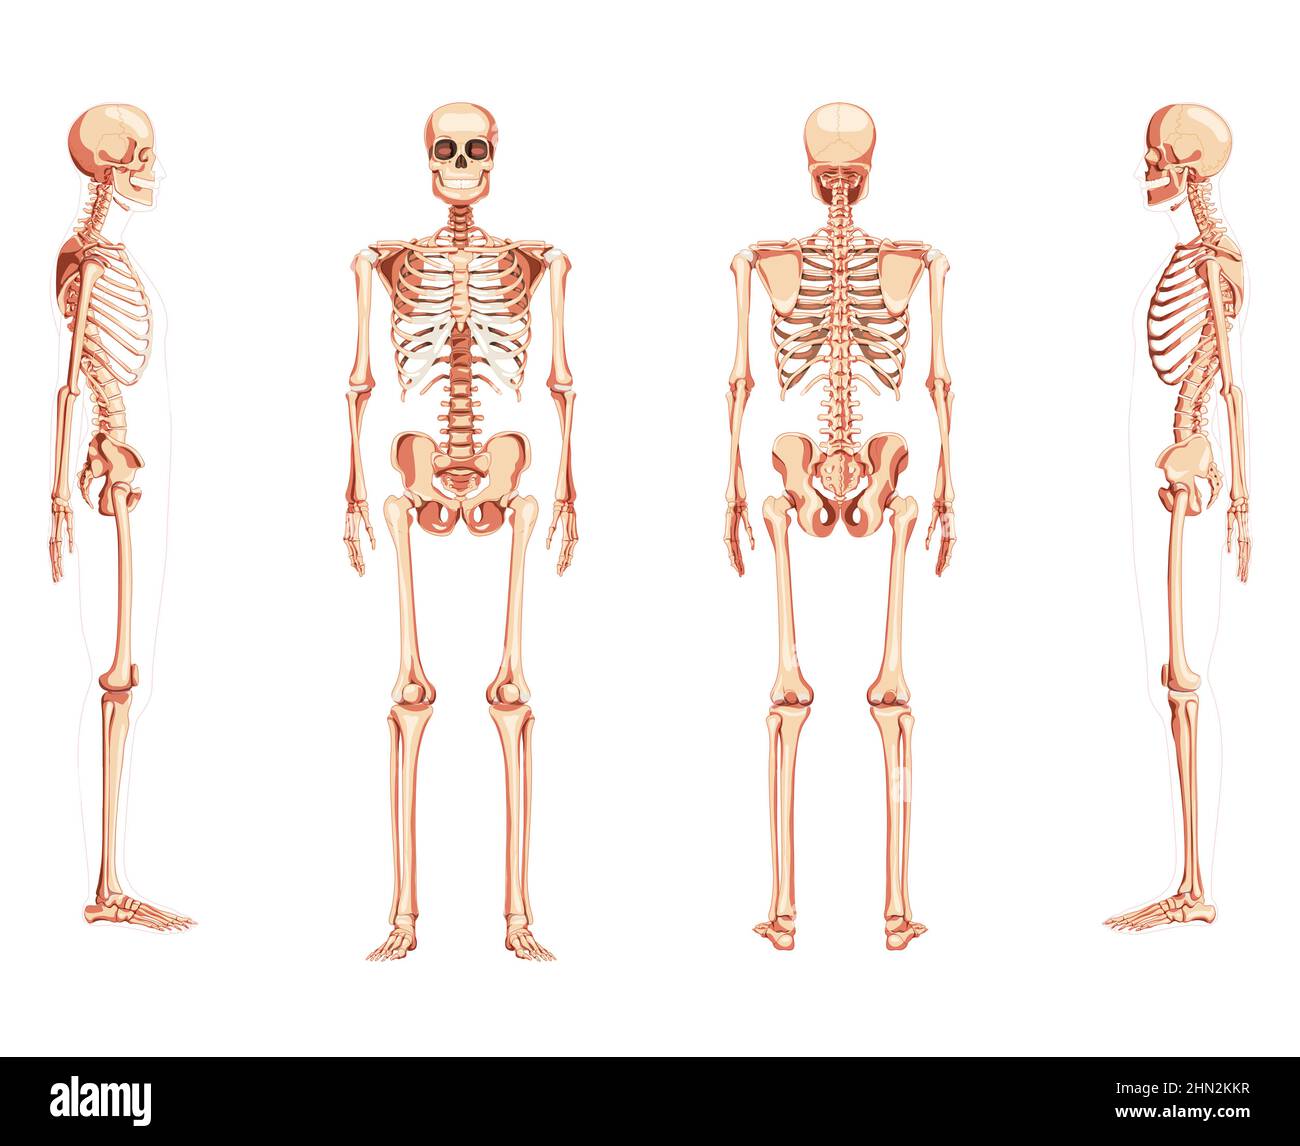 Set of Skeleton Human front back side view with two arm poses ventral, lateral, and dorsal views. Realistic flat natural color concept Vector illustration of anatomy isolated on white background Stock Vector